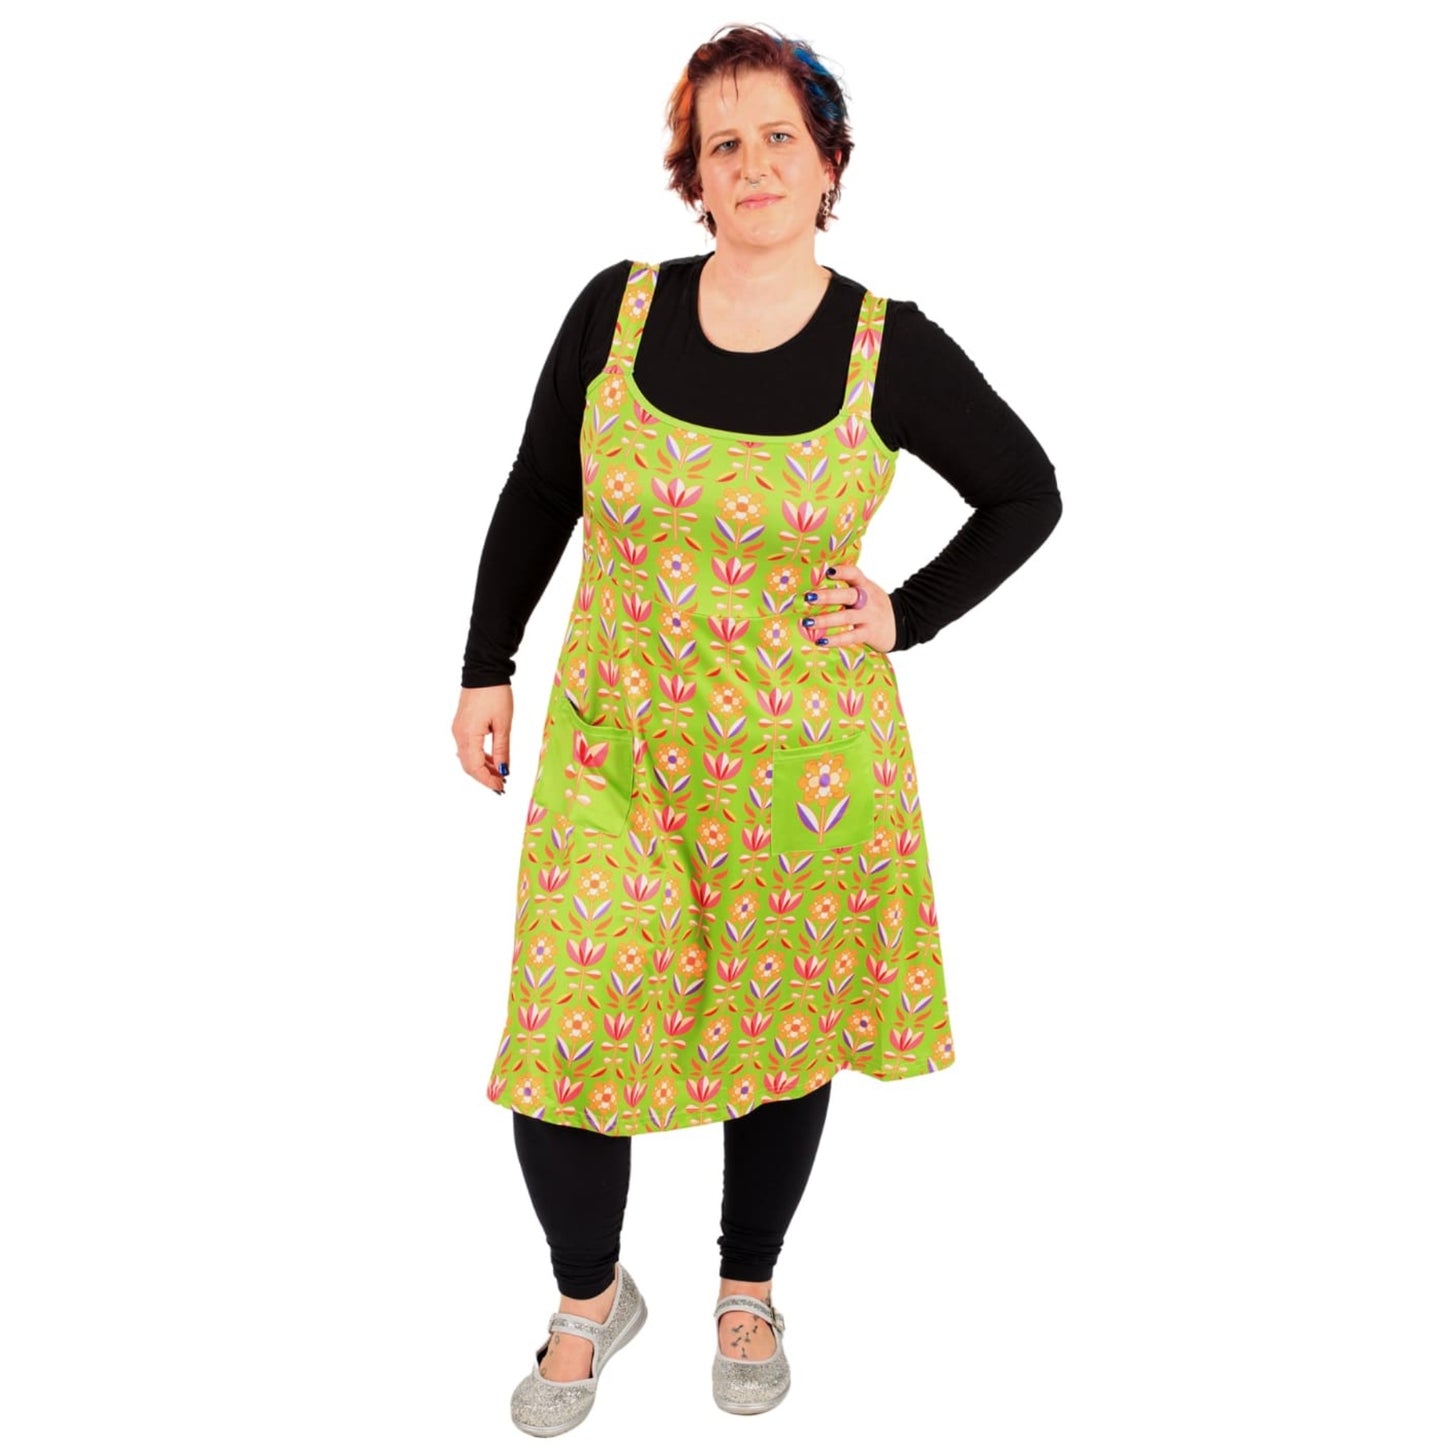 Retro Flower Pinafore by RainbowsAndFairies.com.au (Floral - 70s Wallpaper - Dress With Pockets - Pinny - Kitsch - Rockabilly - Vintage Inspired) - SKU: CL_PFORE_RETFL_ORG - Pic-02